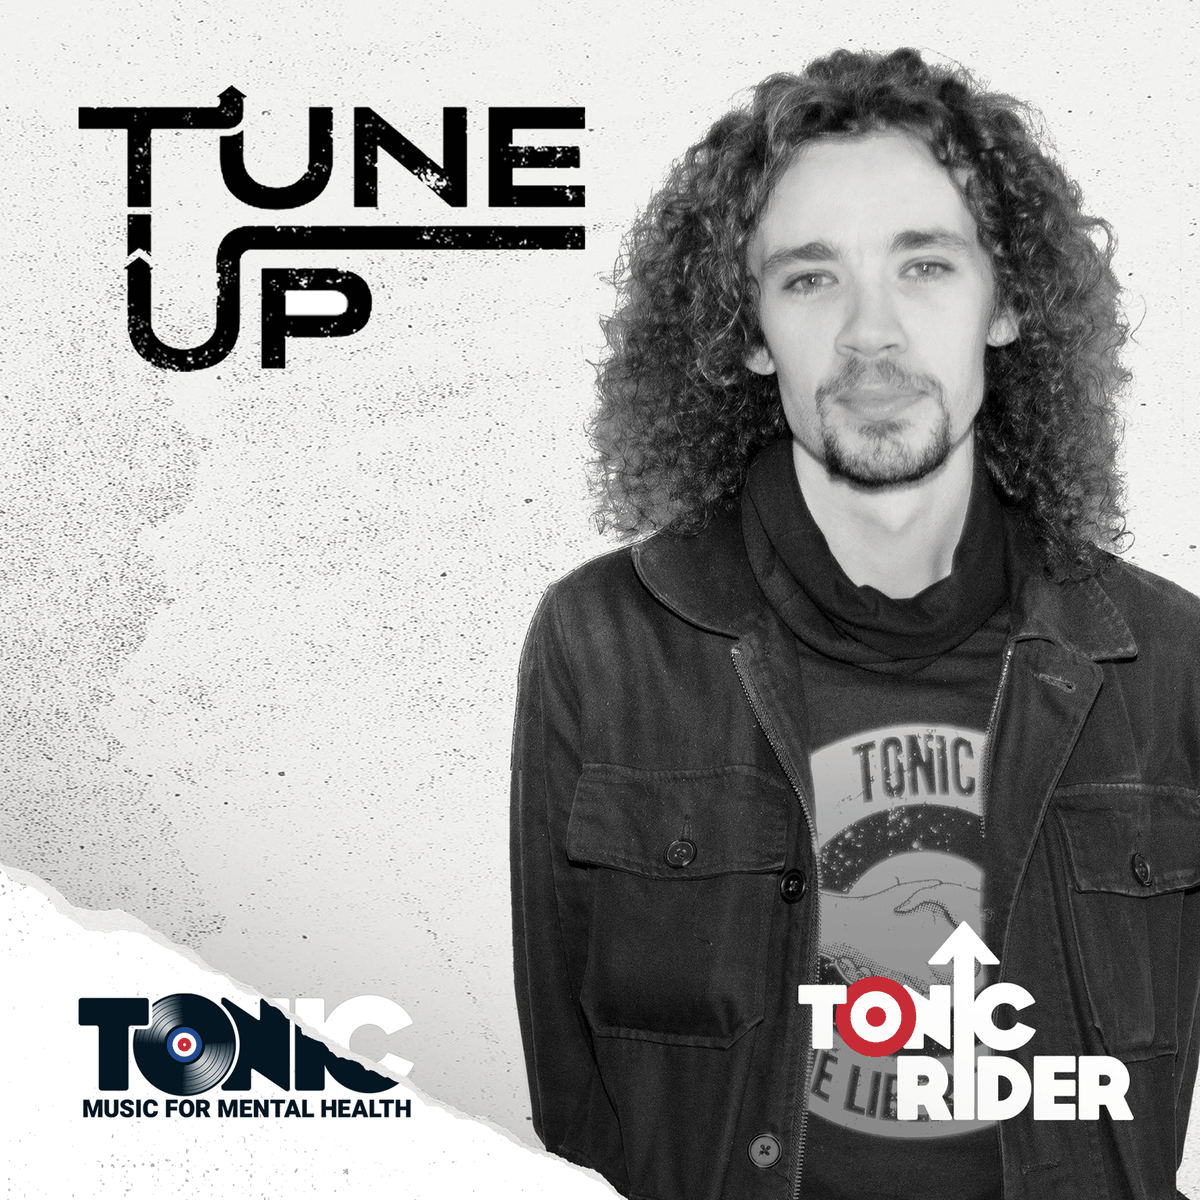 Tonic Rider provided a workshop on mental health in the music industry for 10 young people attending the Tune Up Project in Ipswich Read all about it here > tonicmusic.co.uk/post/tuneup @TheSmokehouseUK @Outloudmusiccic #TonicRider #TuneUp #MentalHealth #Wellbeing #Music